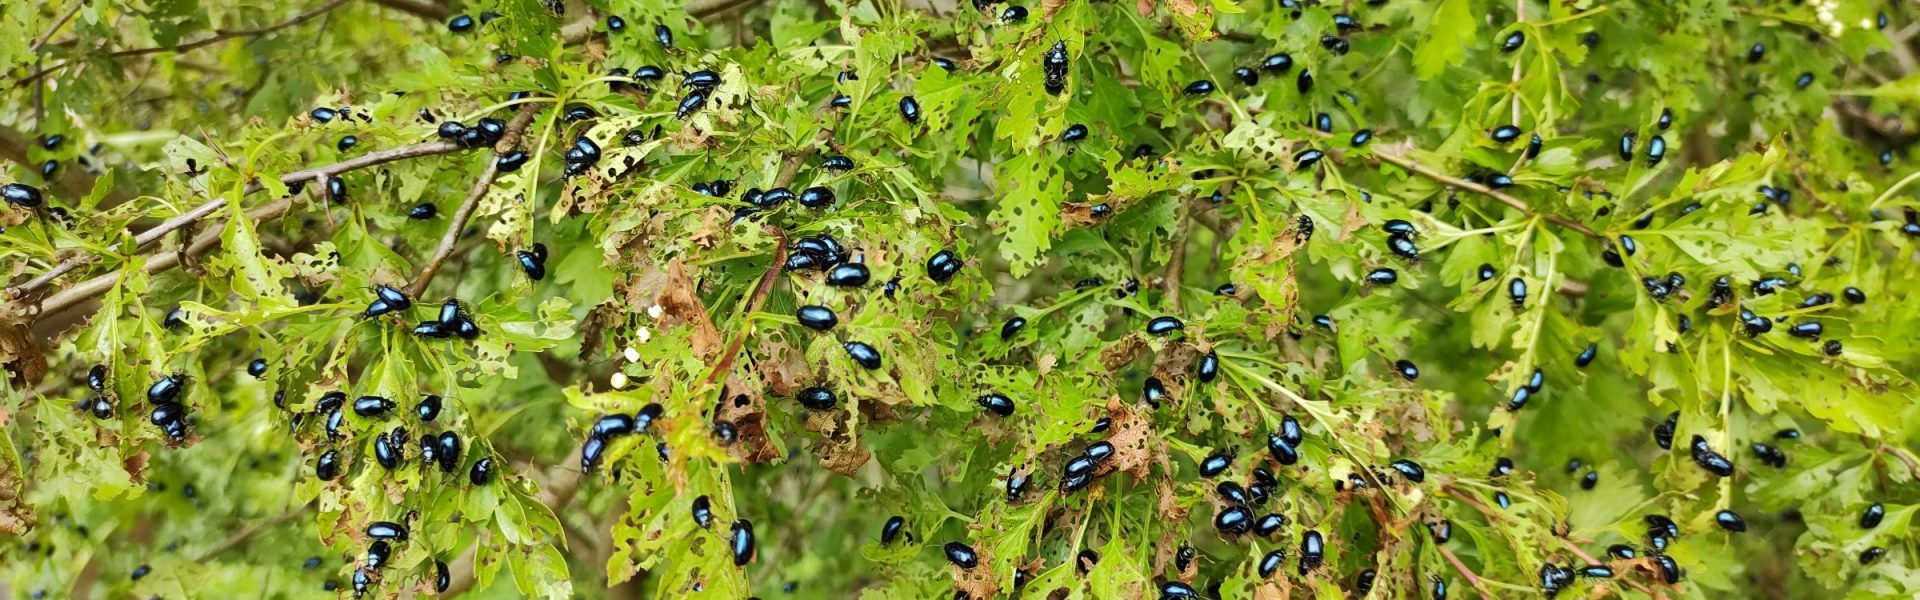 An image showing insect pests.